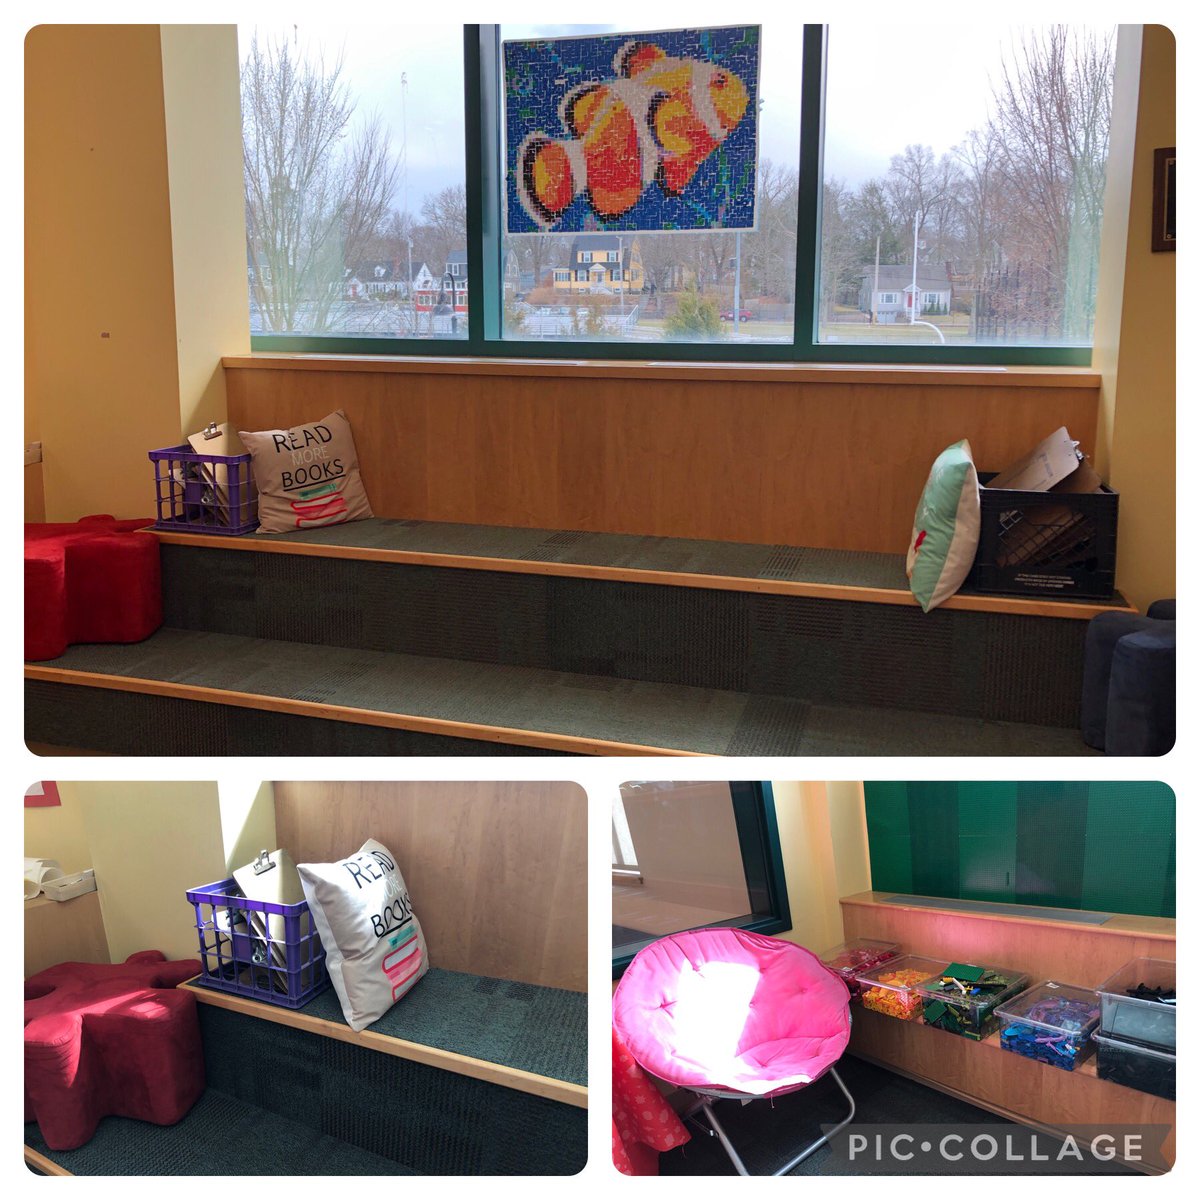 Reader Leaders gave the space a mini-makeover. A family donated some ottomans and we had some random items that needed homes. I love that our Stick Together looks like stained glass when the sun shines!